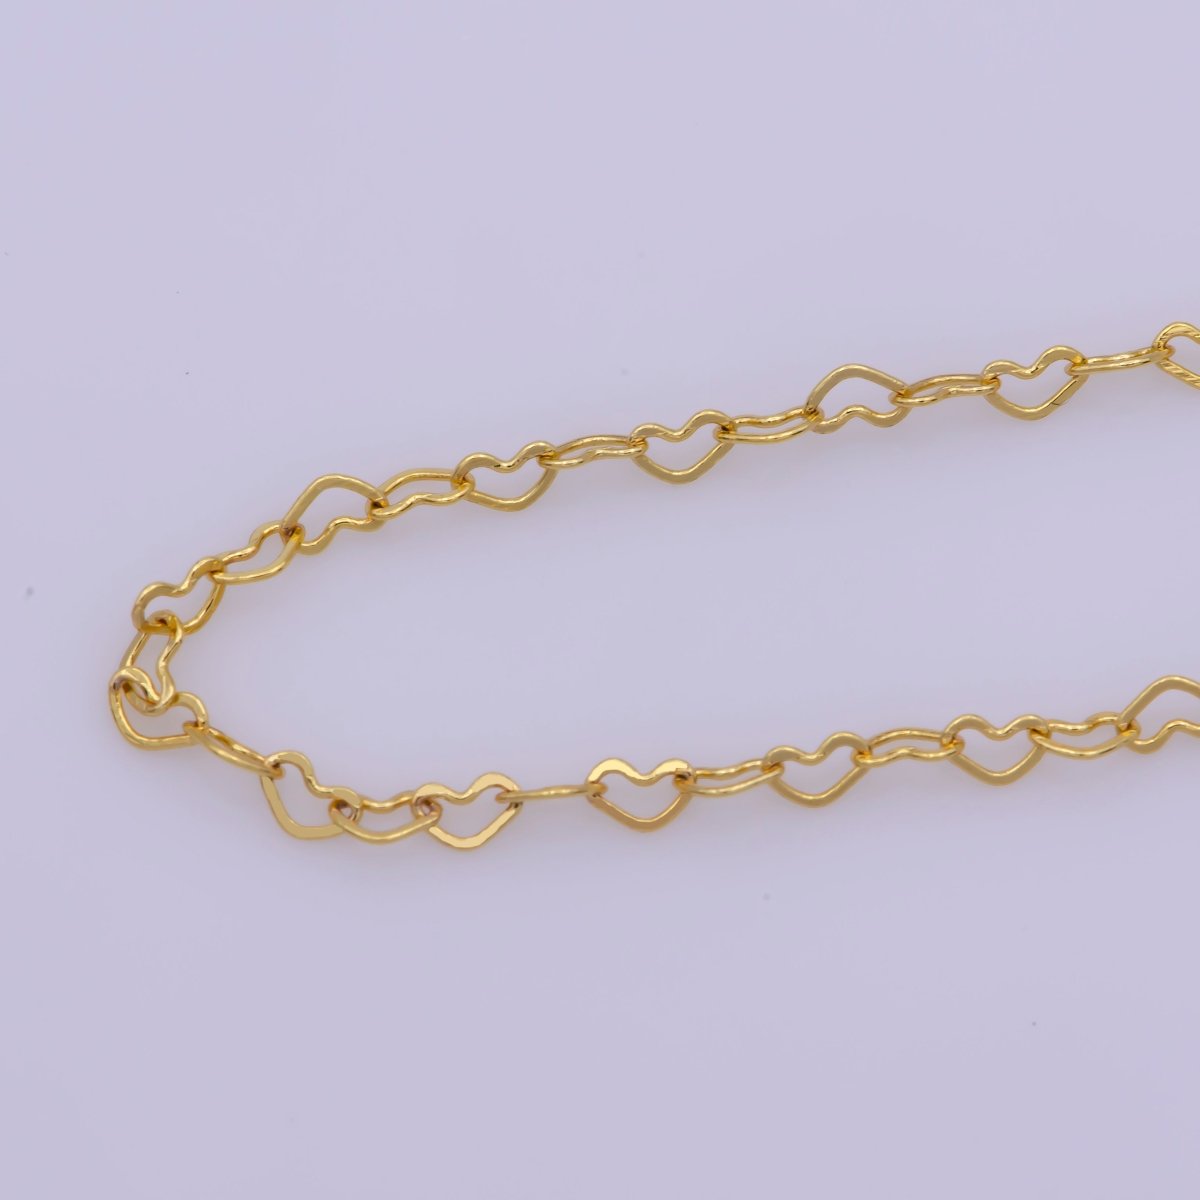 *Pre-order only with MOQ of 50 pcs* 24K Gold Filled 1.6mm Heart Chain Necklace With Spring Clasp 18 inch long Dainty Necklace WA-371 - DLUXCA